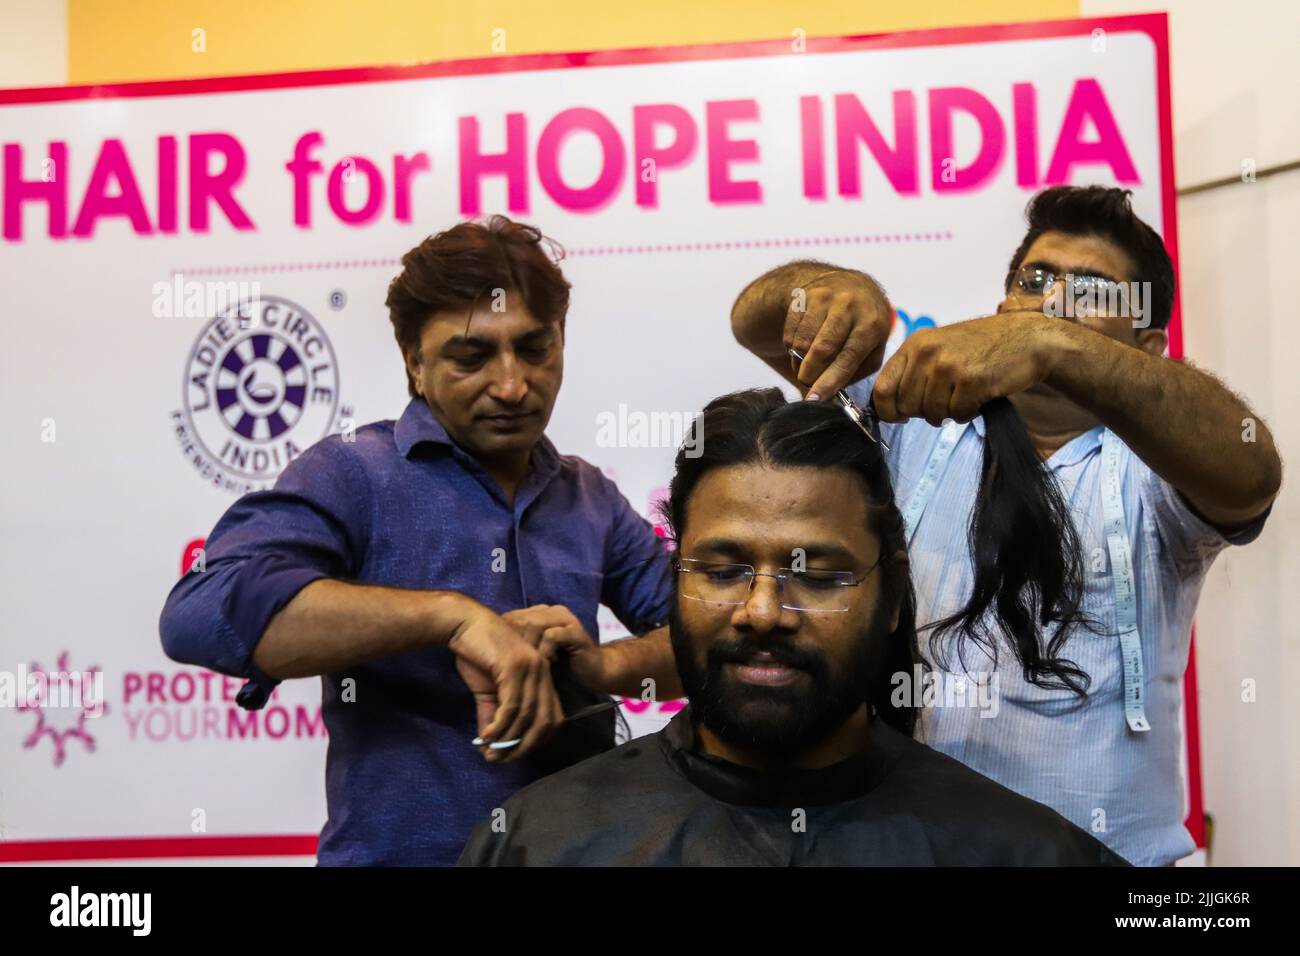 Hairdressers prepare the hair of a youth donor before snipping off during a  donation drive to support cancer survivors, organized by Hair for Hope  India foundation's Cut-a-thon event in New Delhi. As